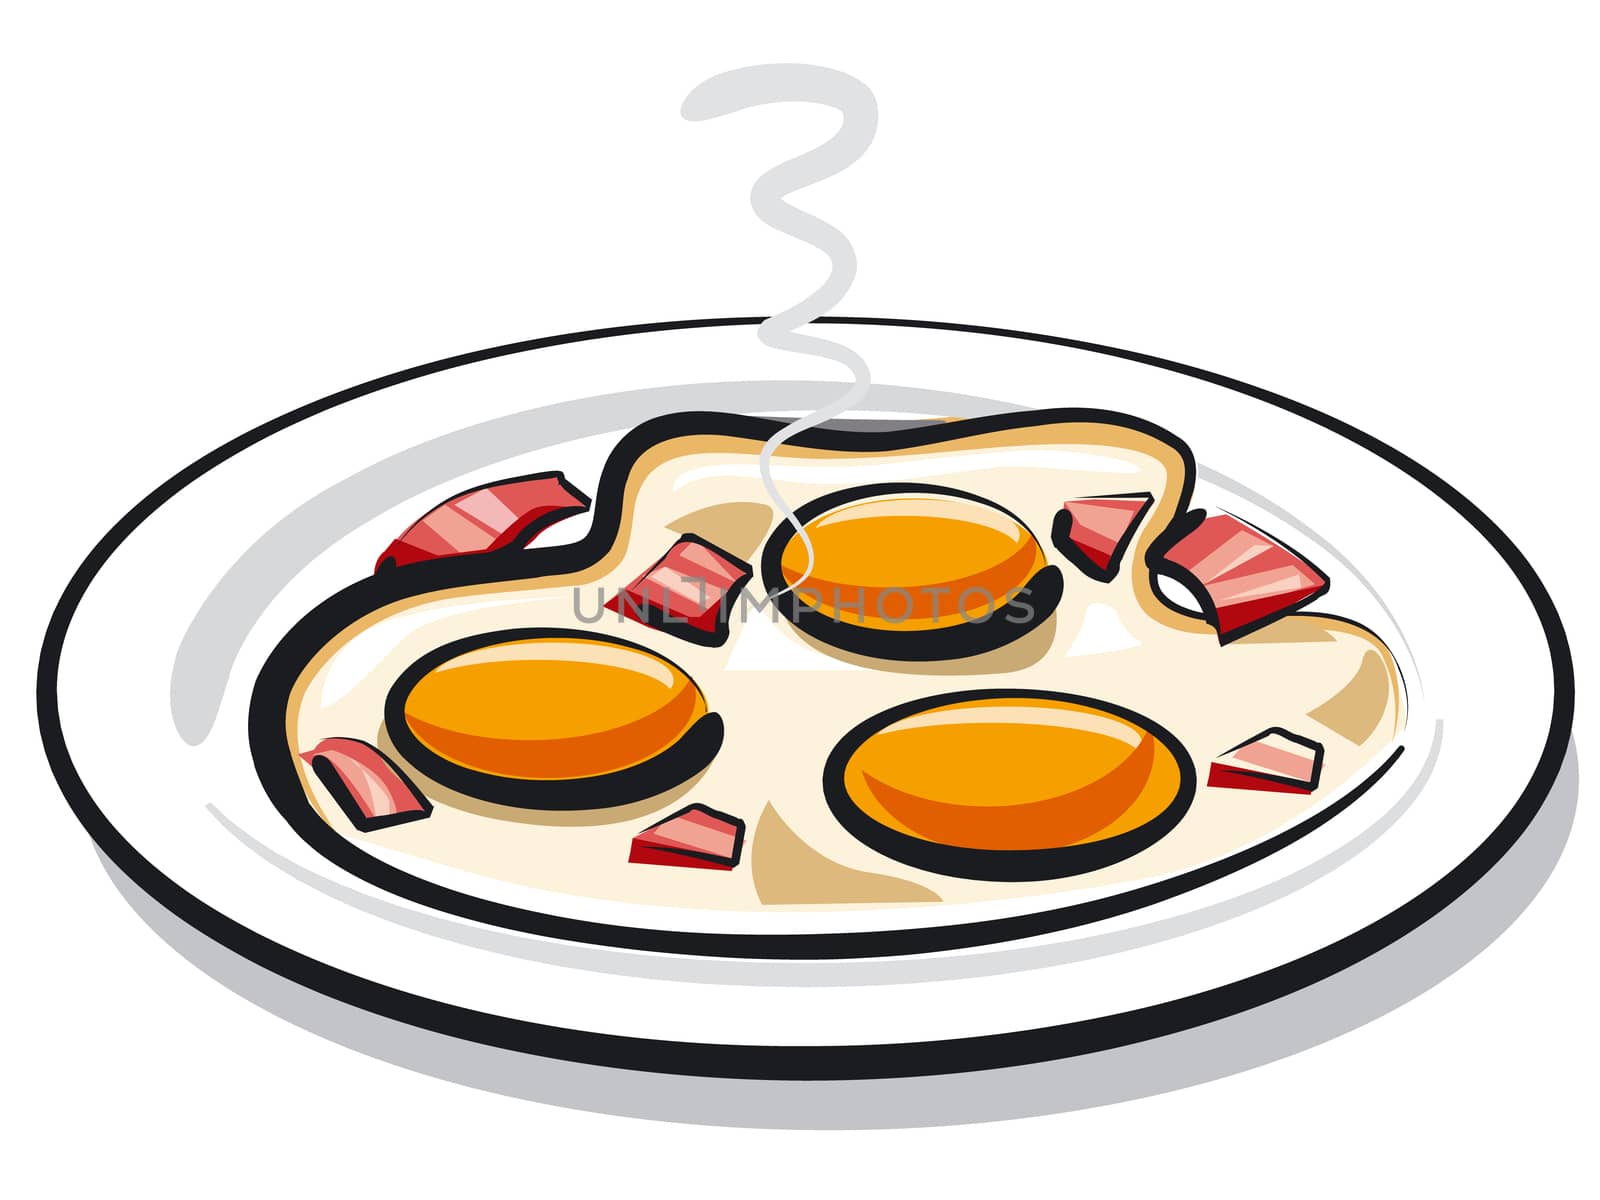 illustration of fried eggs with bacon on plate